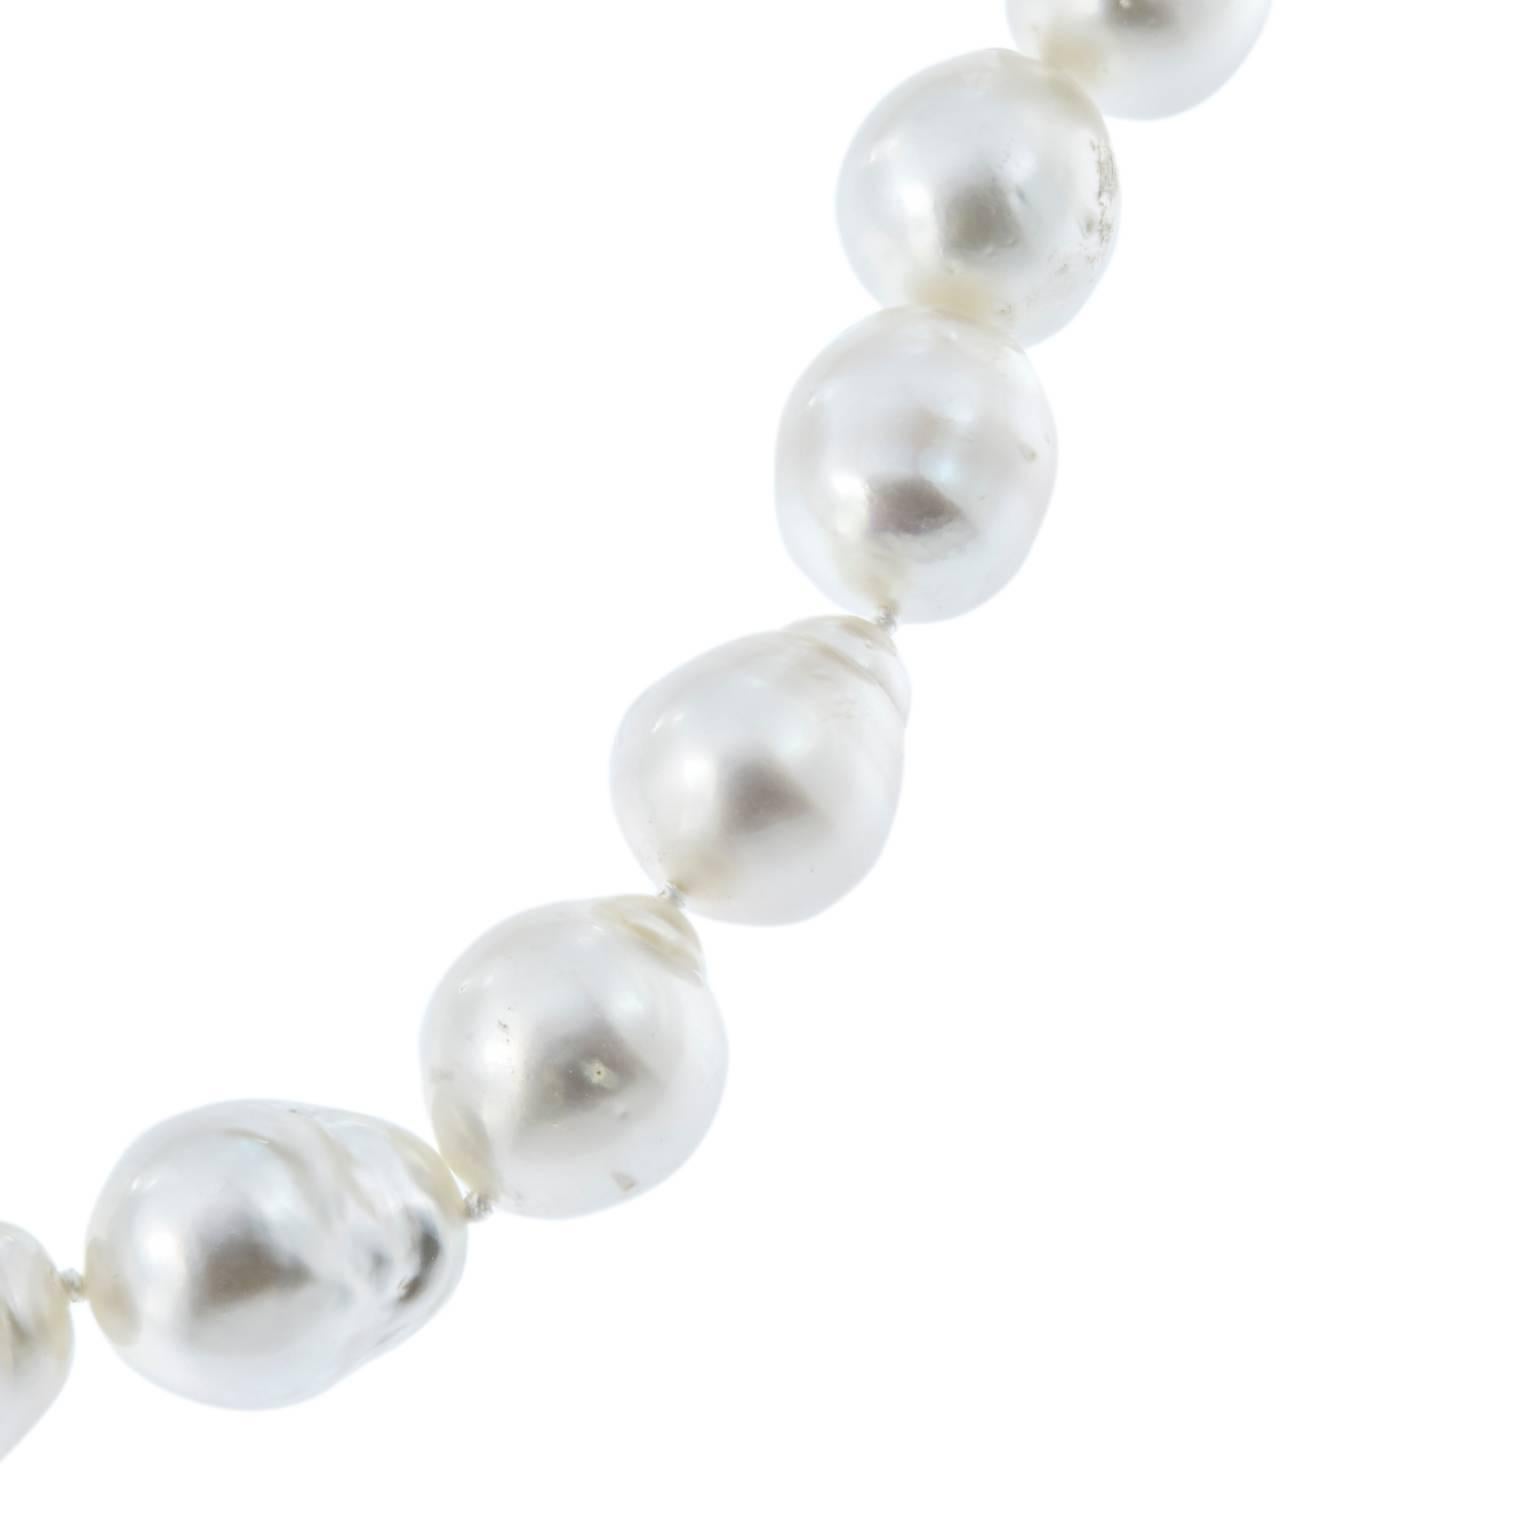 Stunning south sea baroque pearl necklace is comprised of 27 pearls, 12-16 mm. Clasp is 18k white gold. Weighs 89.9 grams. 17 in Long.